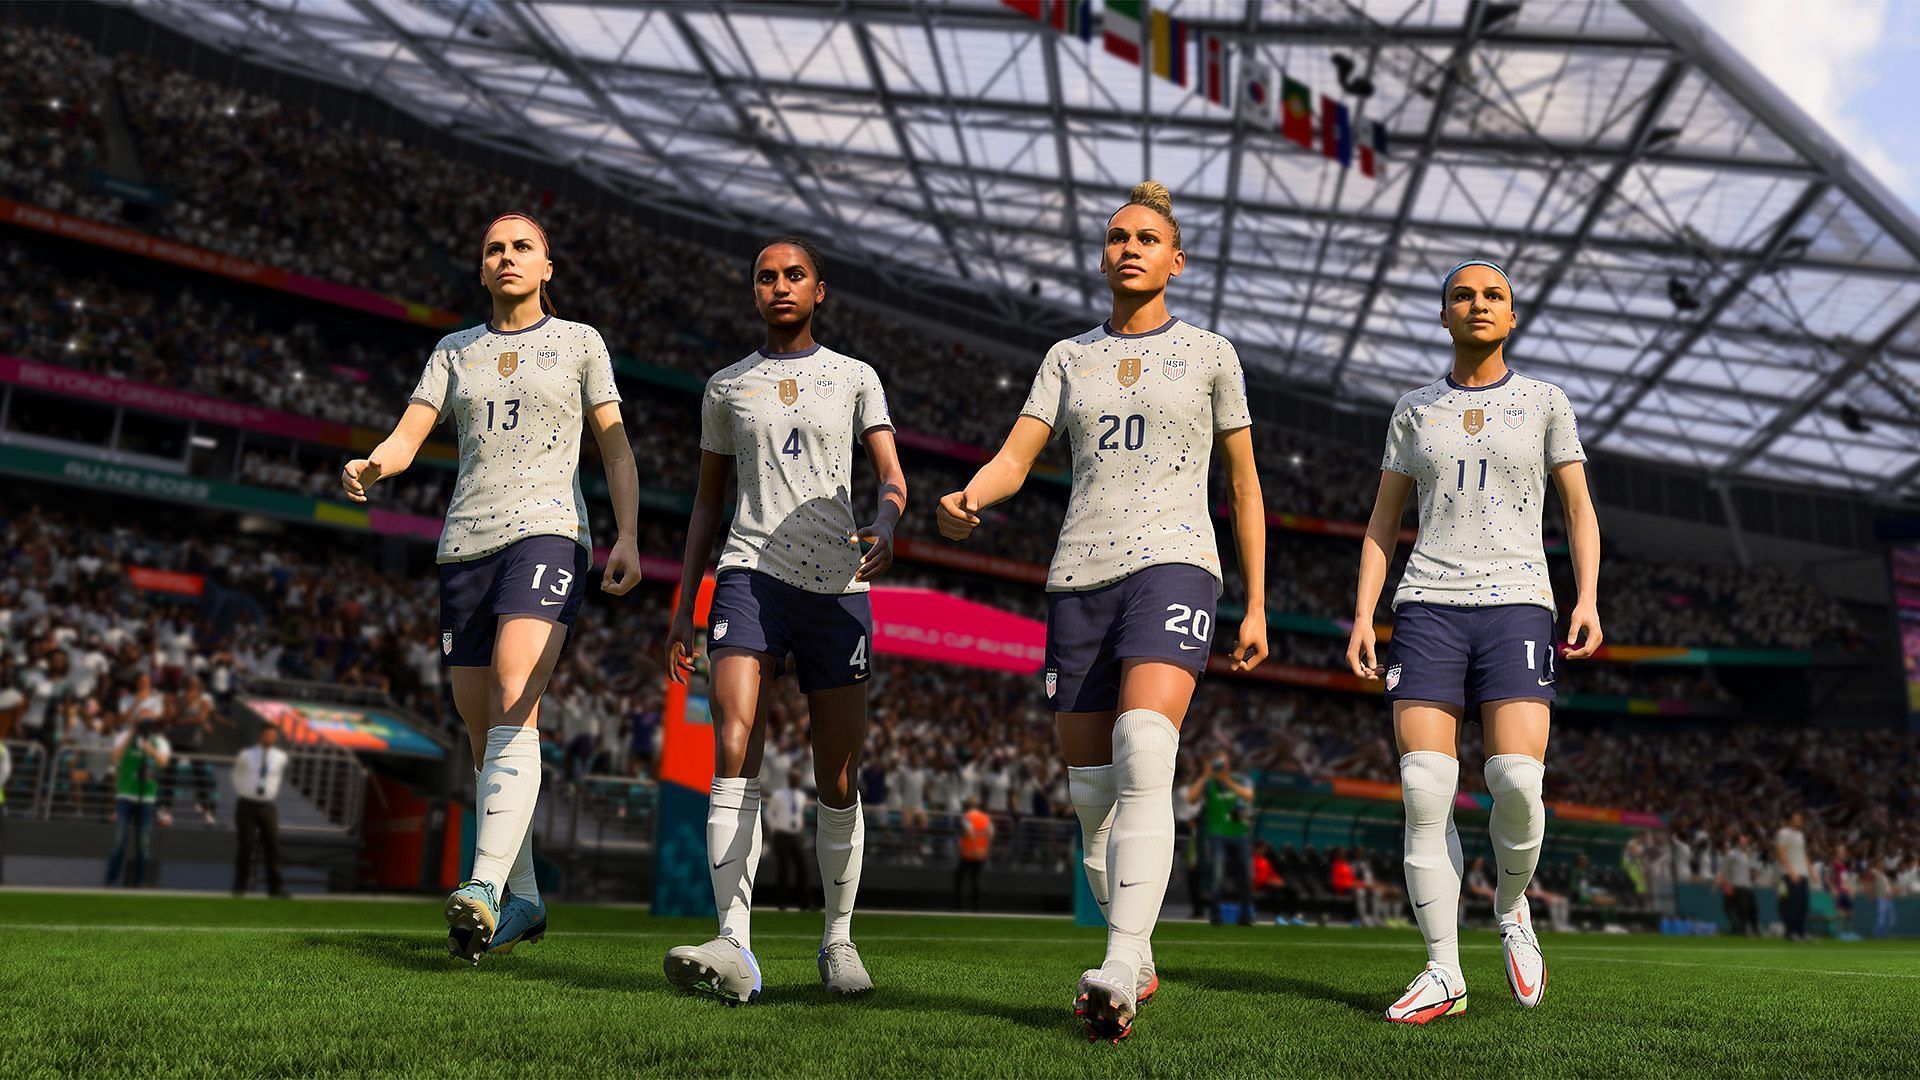 FIFA Women's World Cup Aus & NZ coming to FIFA 23 - Vamers